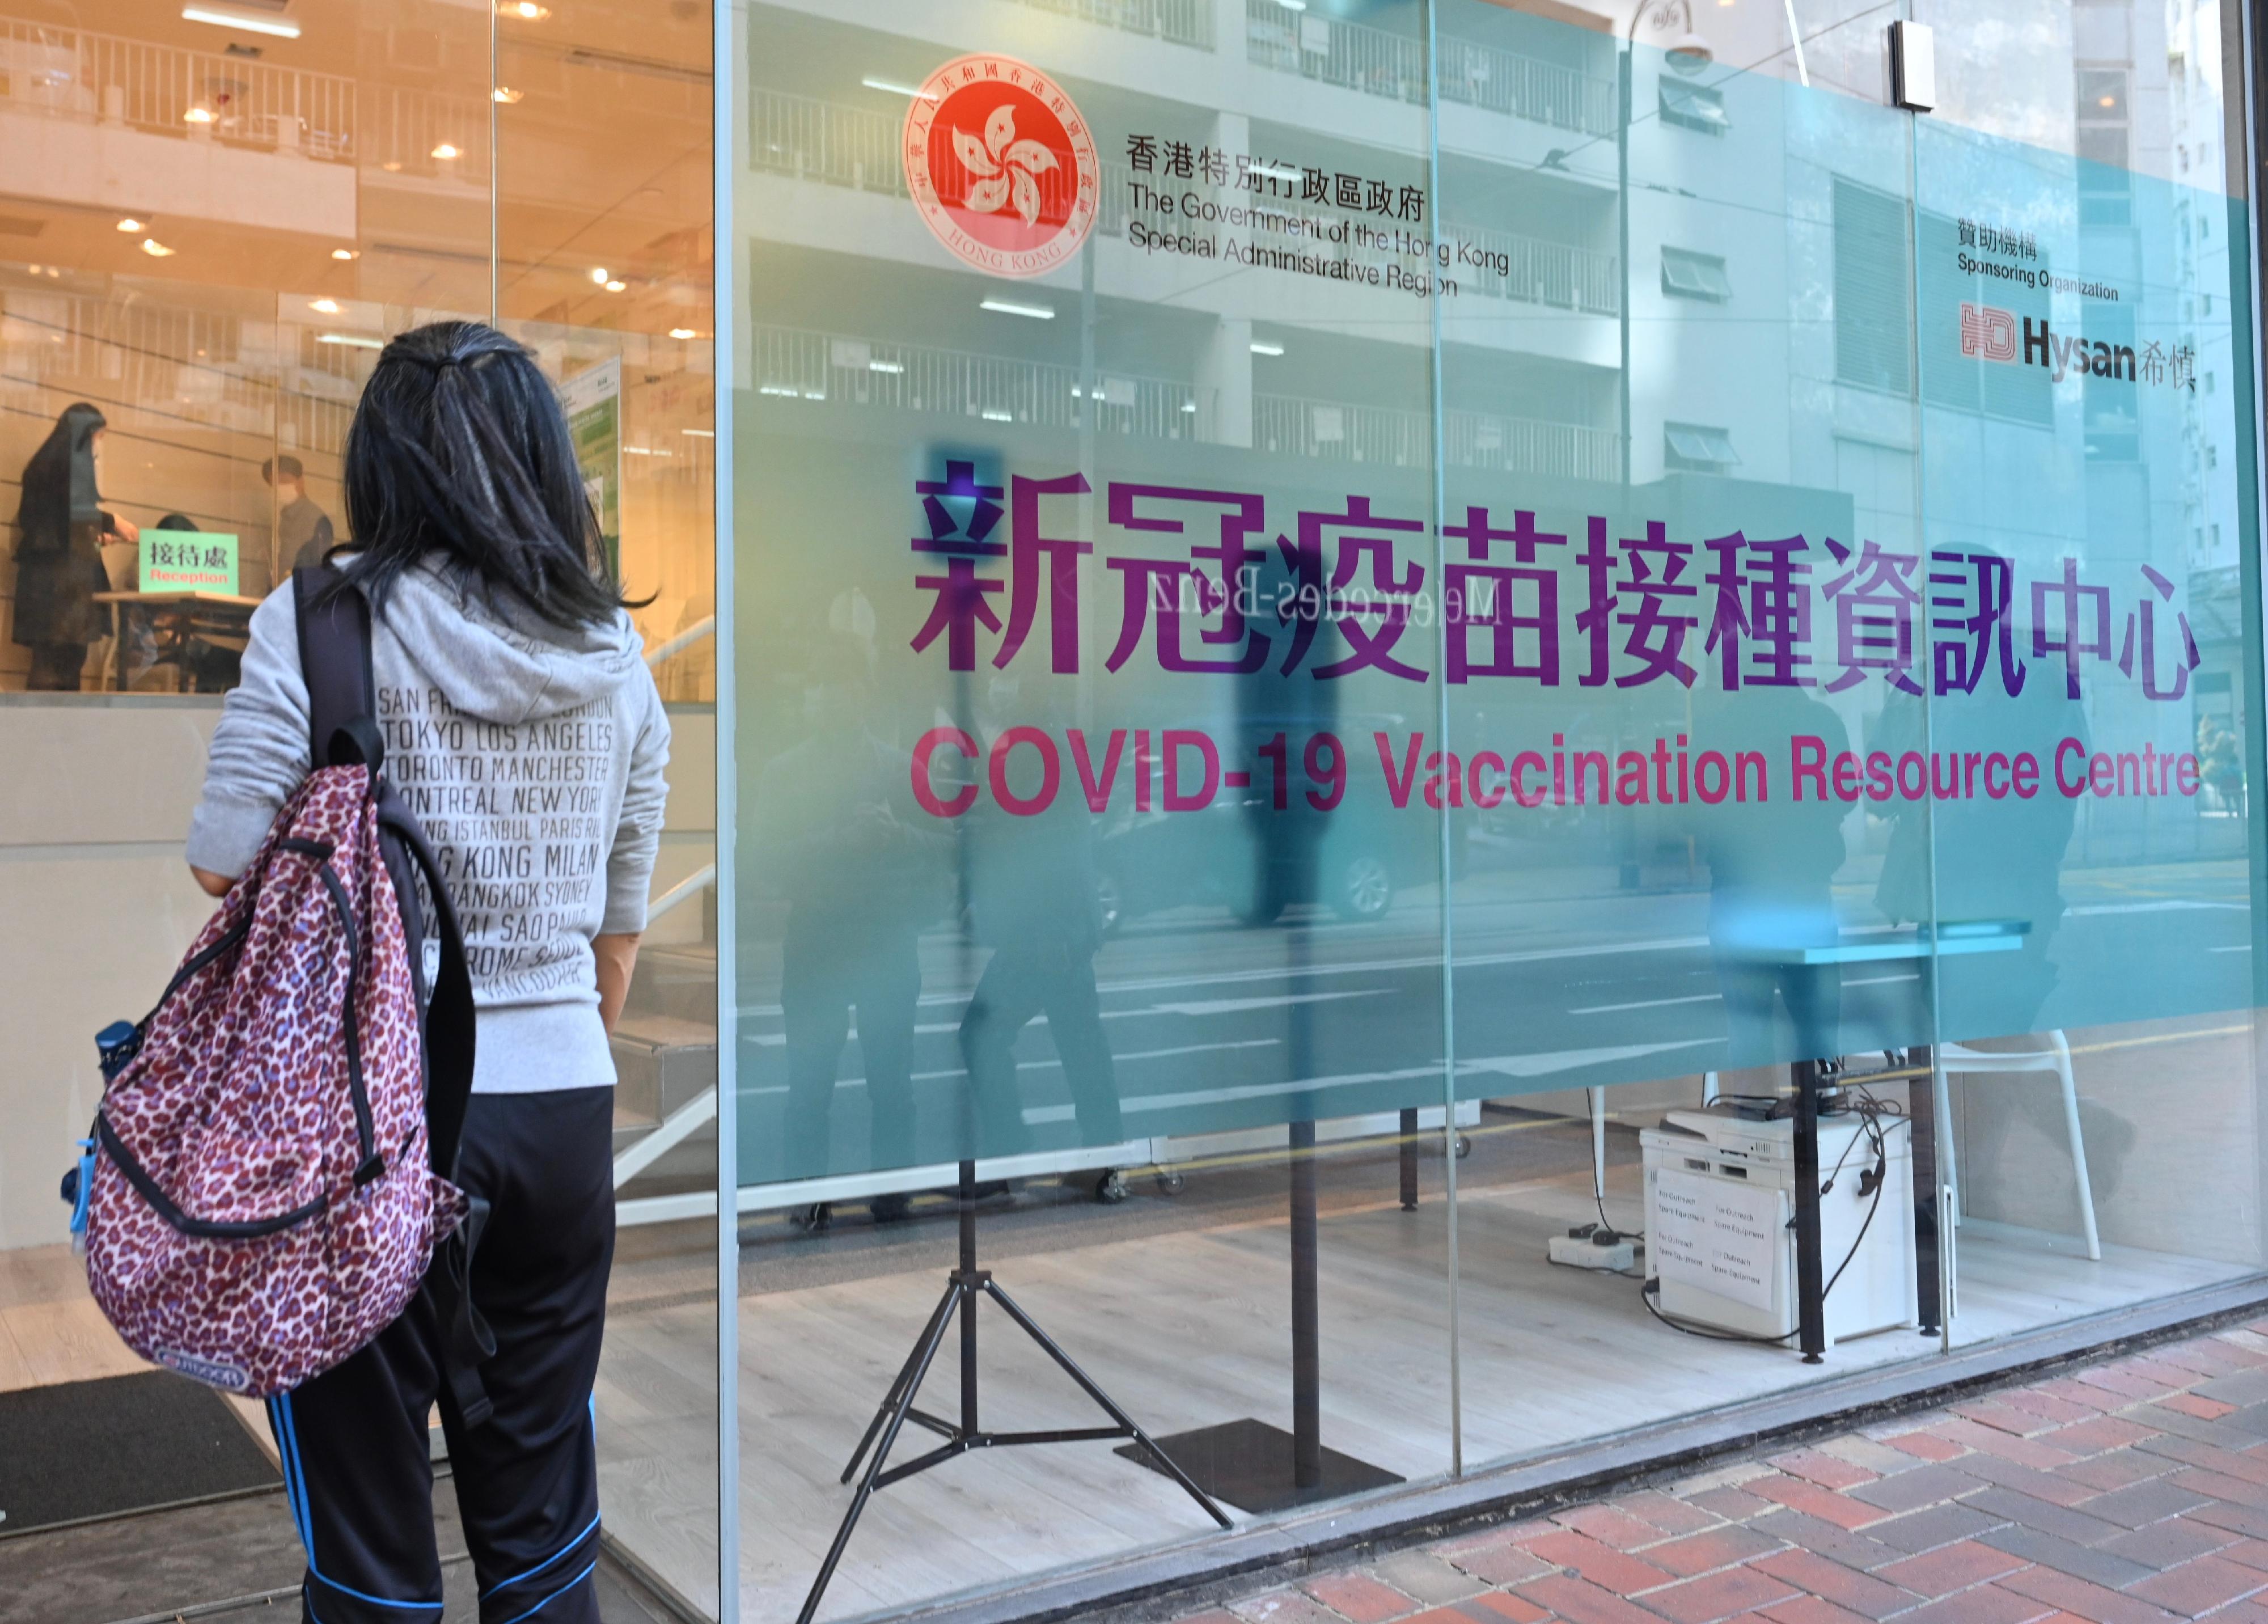 The Satellite Community Vaccination Centre in Leighton Centre in Causeway Bay came into operation today (February 11) to provide the BioNTech vaccination service to members of the public. A COVID-19 Vaccination Resource Centre was also set up by the Government at Leighton Centre to provide the public with information relating to COVID-19 vaccines, including vaccination venues and the latest situation of COVID-19 vaccination in Hong Kong.